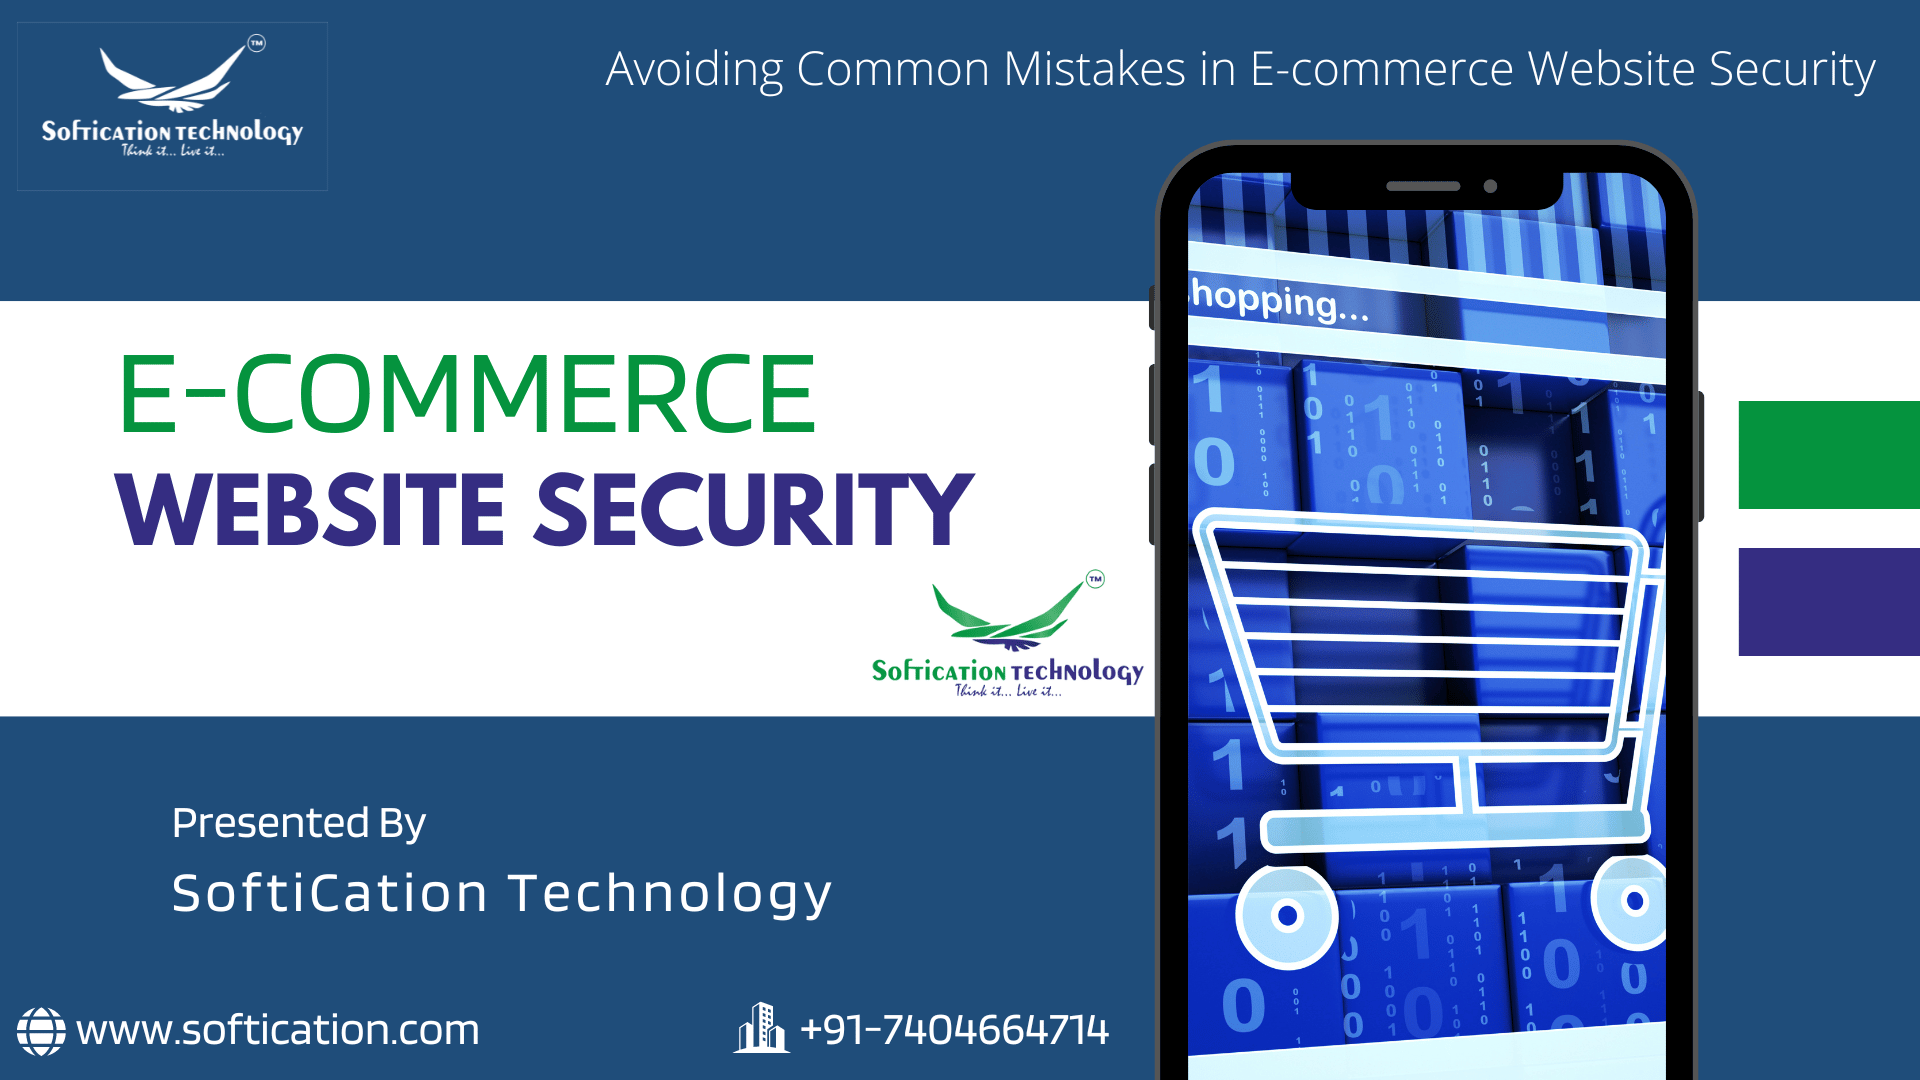 Secure your e-commerce website with confidence! Avoid common pitfalls and implement best practices for top-notch security.